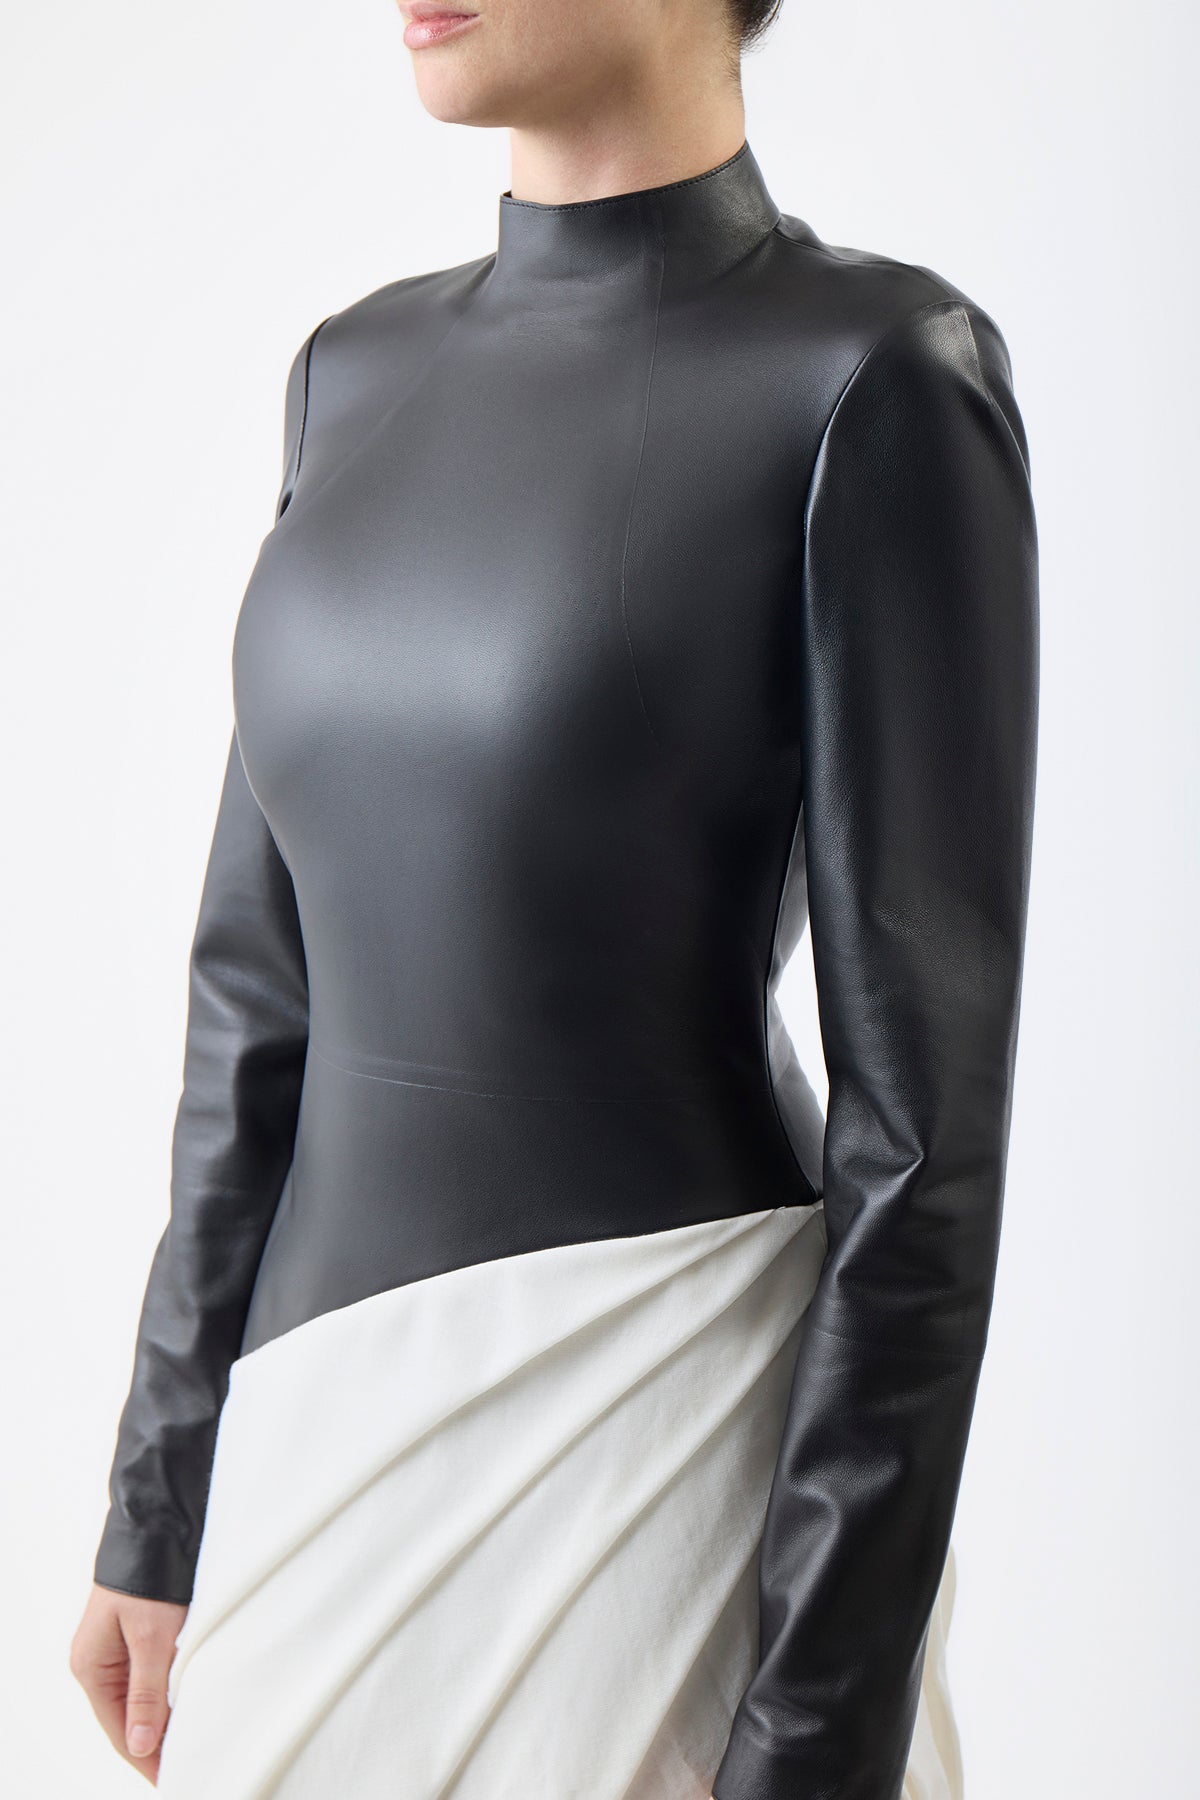 Aulay Pleated Dress in Black Leather & Cashmere Wool